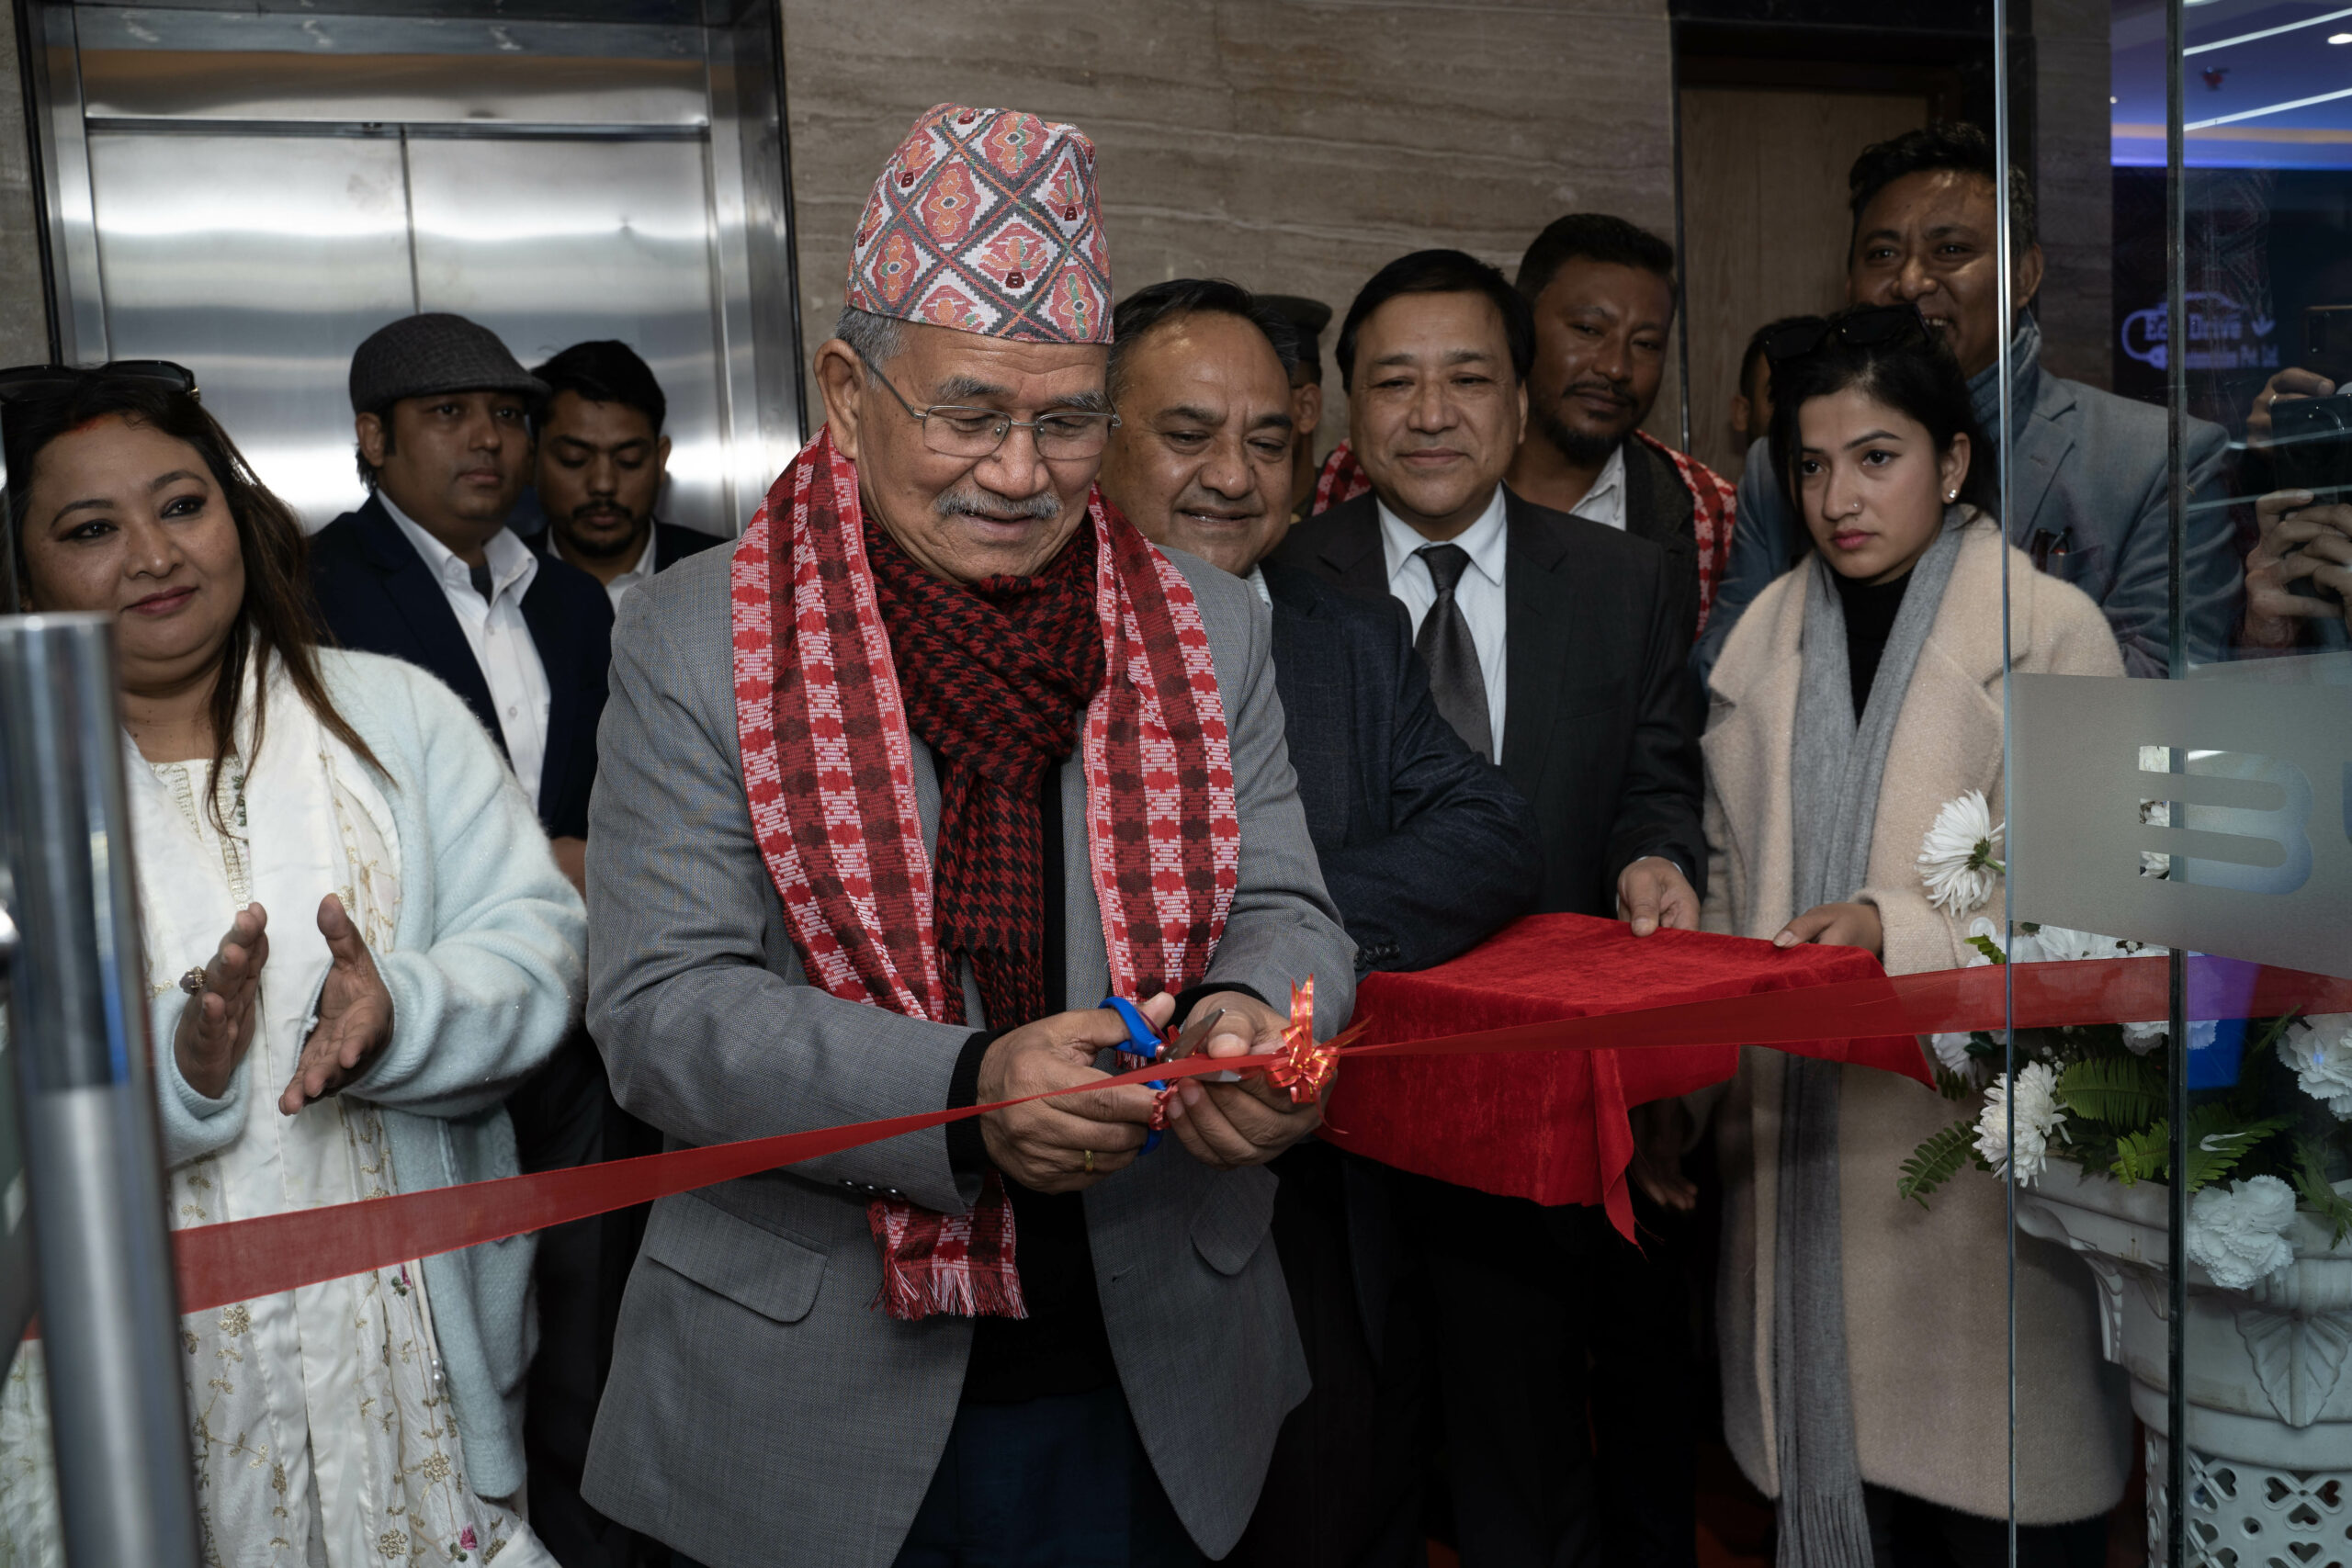 BYD inaugurates new showroom in Lalitpur, Nepal, reinforcing commitment to sustainable transportation